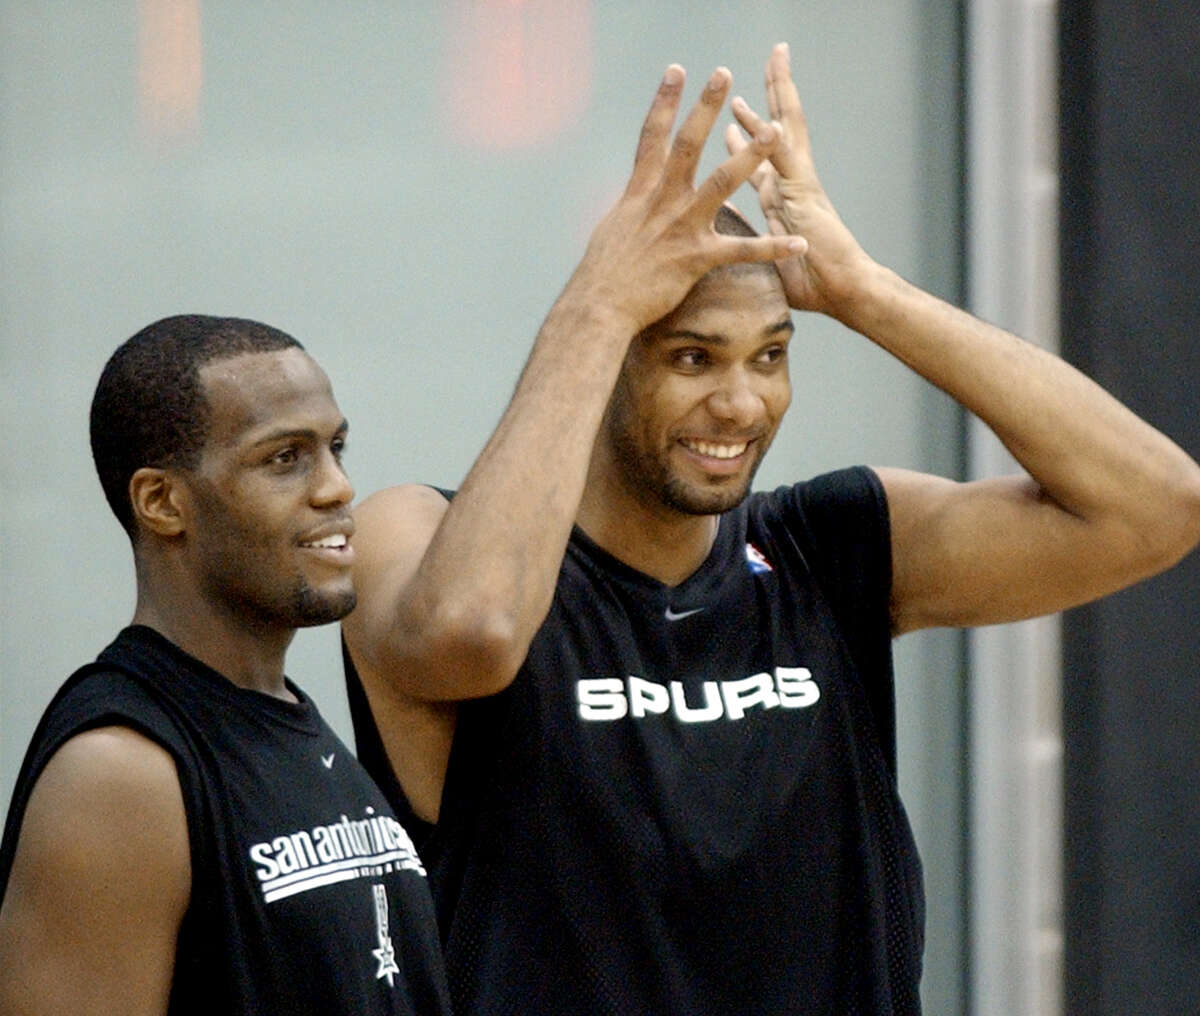 Spurs forward Tim Duncan, right, with forward Malik Rose, jokes with teammates during the first day of training camp at the team’s practice facility in San Antonio on Sept. 30, 2003.